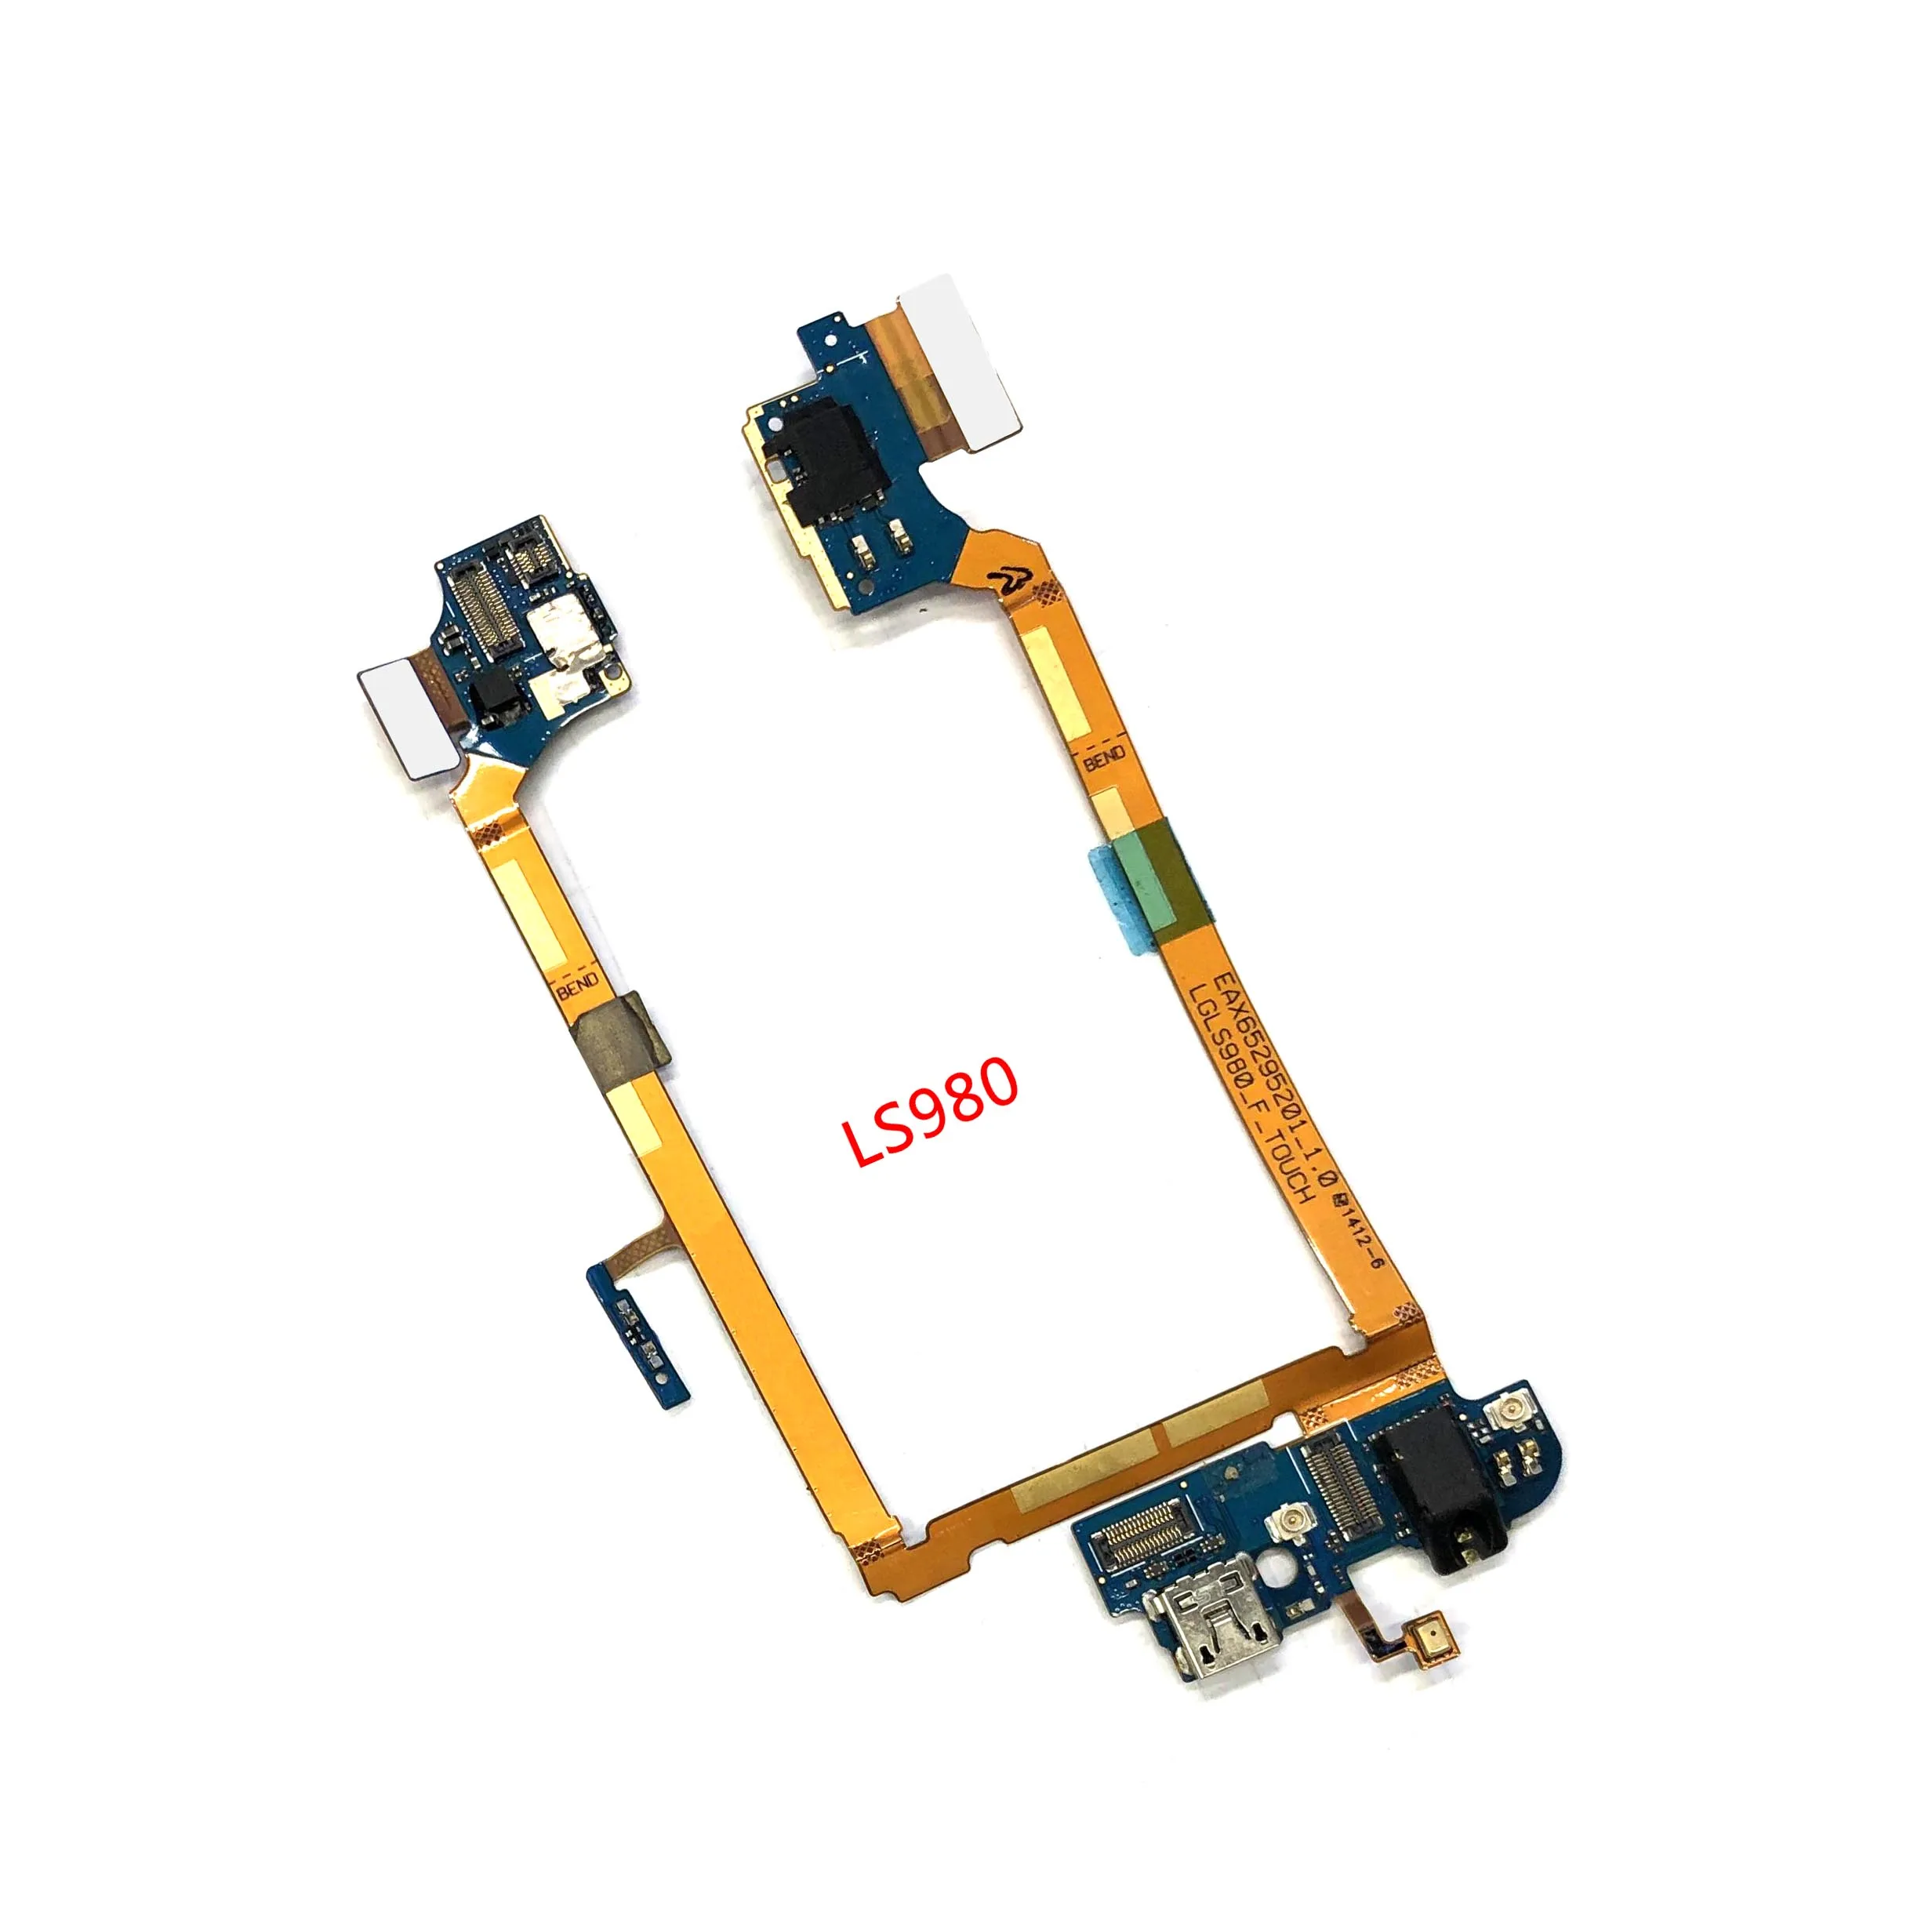 For LG G2 D802 D805 VS980 USB Charging Flex Cable Dock Connector Port Cable Microphone Headphone Jack Power on off Button